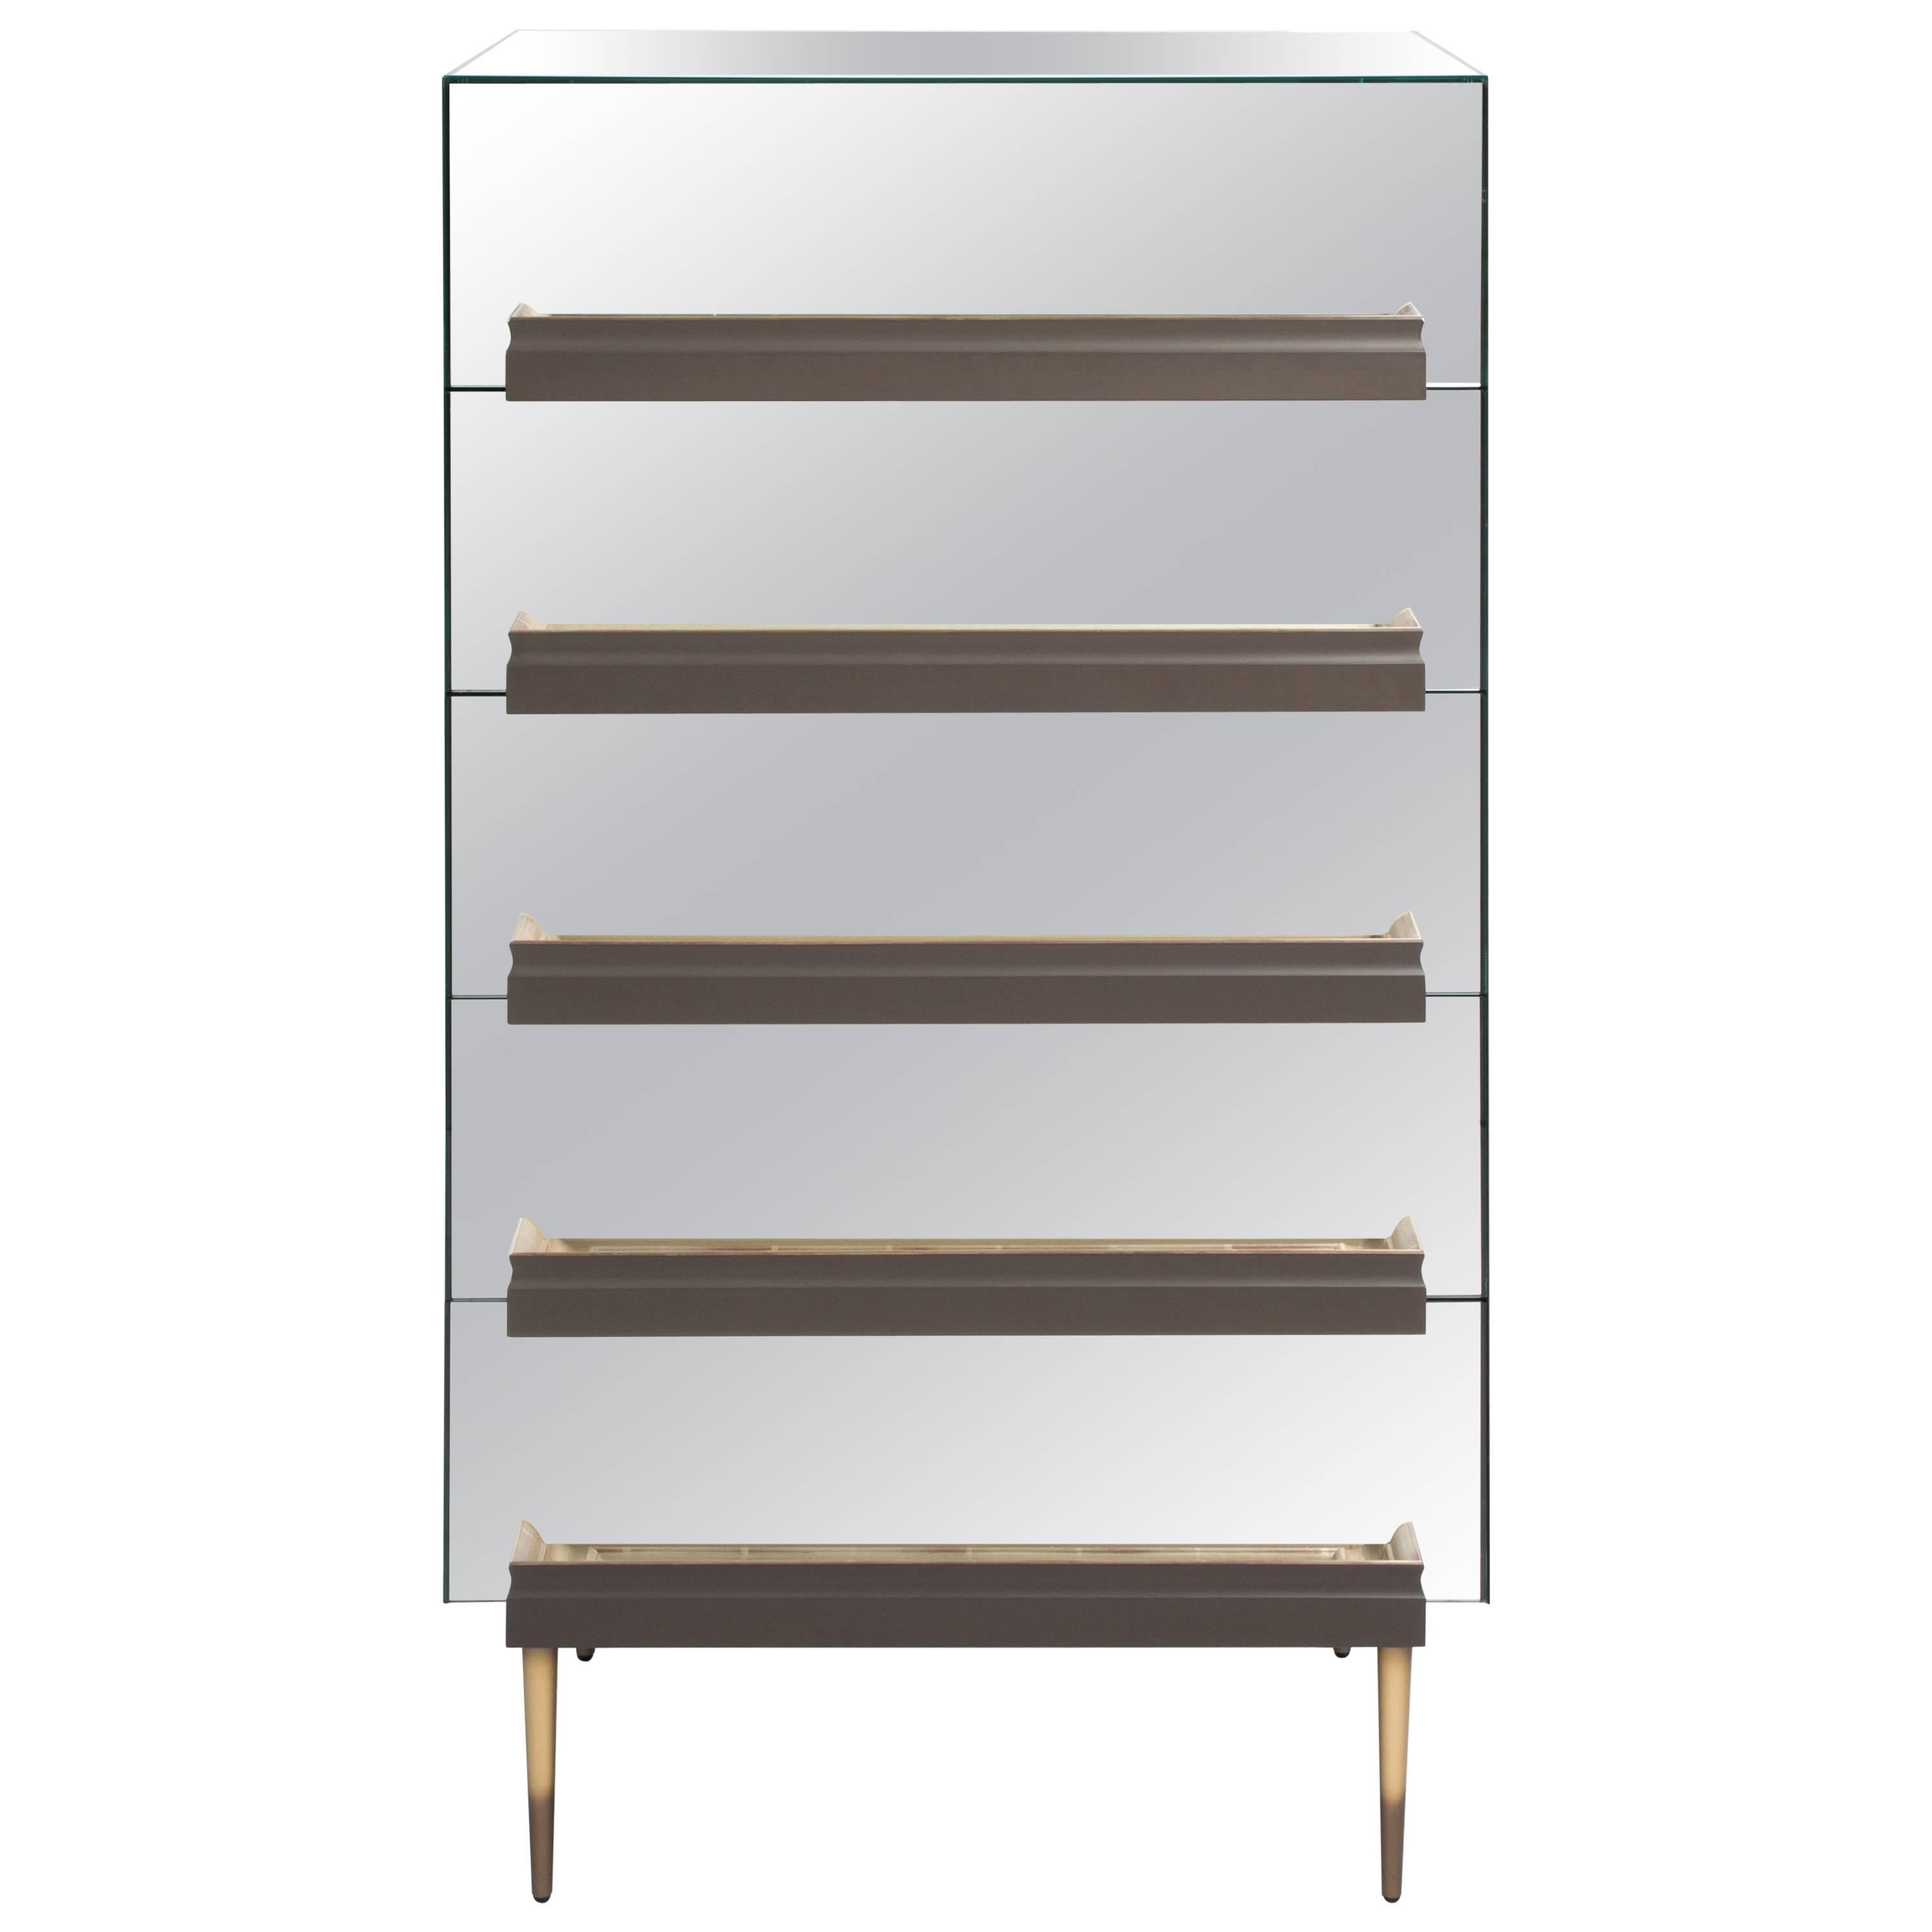 Part of the illusion collection, this dresser uses mirrors to reveal the beauty of picture frame moldings while creating the illusion of floating trays or open drawers. 

Born and raised in Caracas, Venezuela, Luis Pons is an award-winning designer